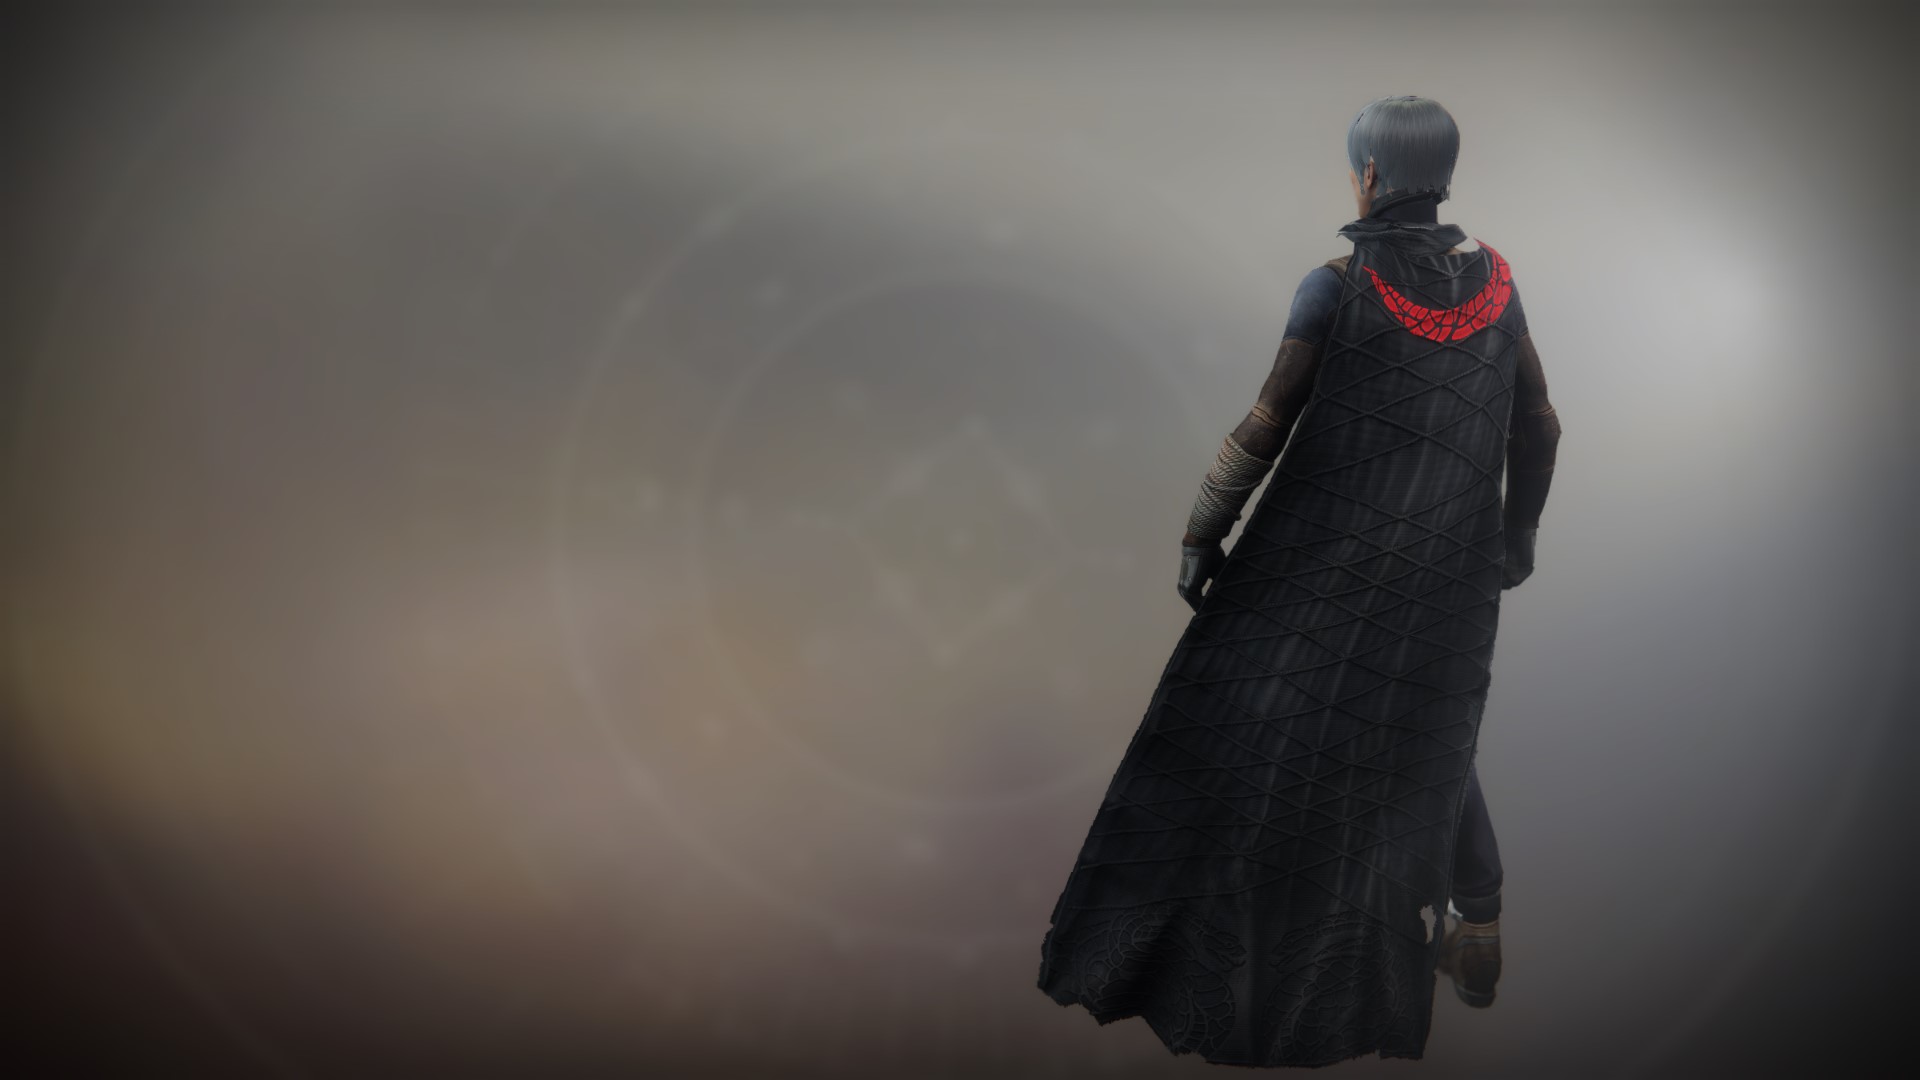 An in-game render of the Illicit Invader Cloak.